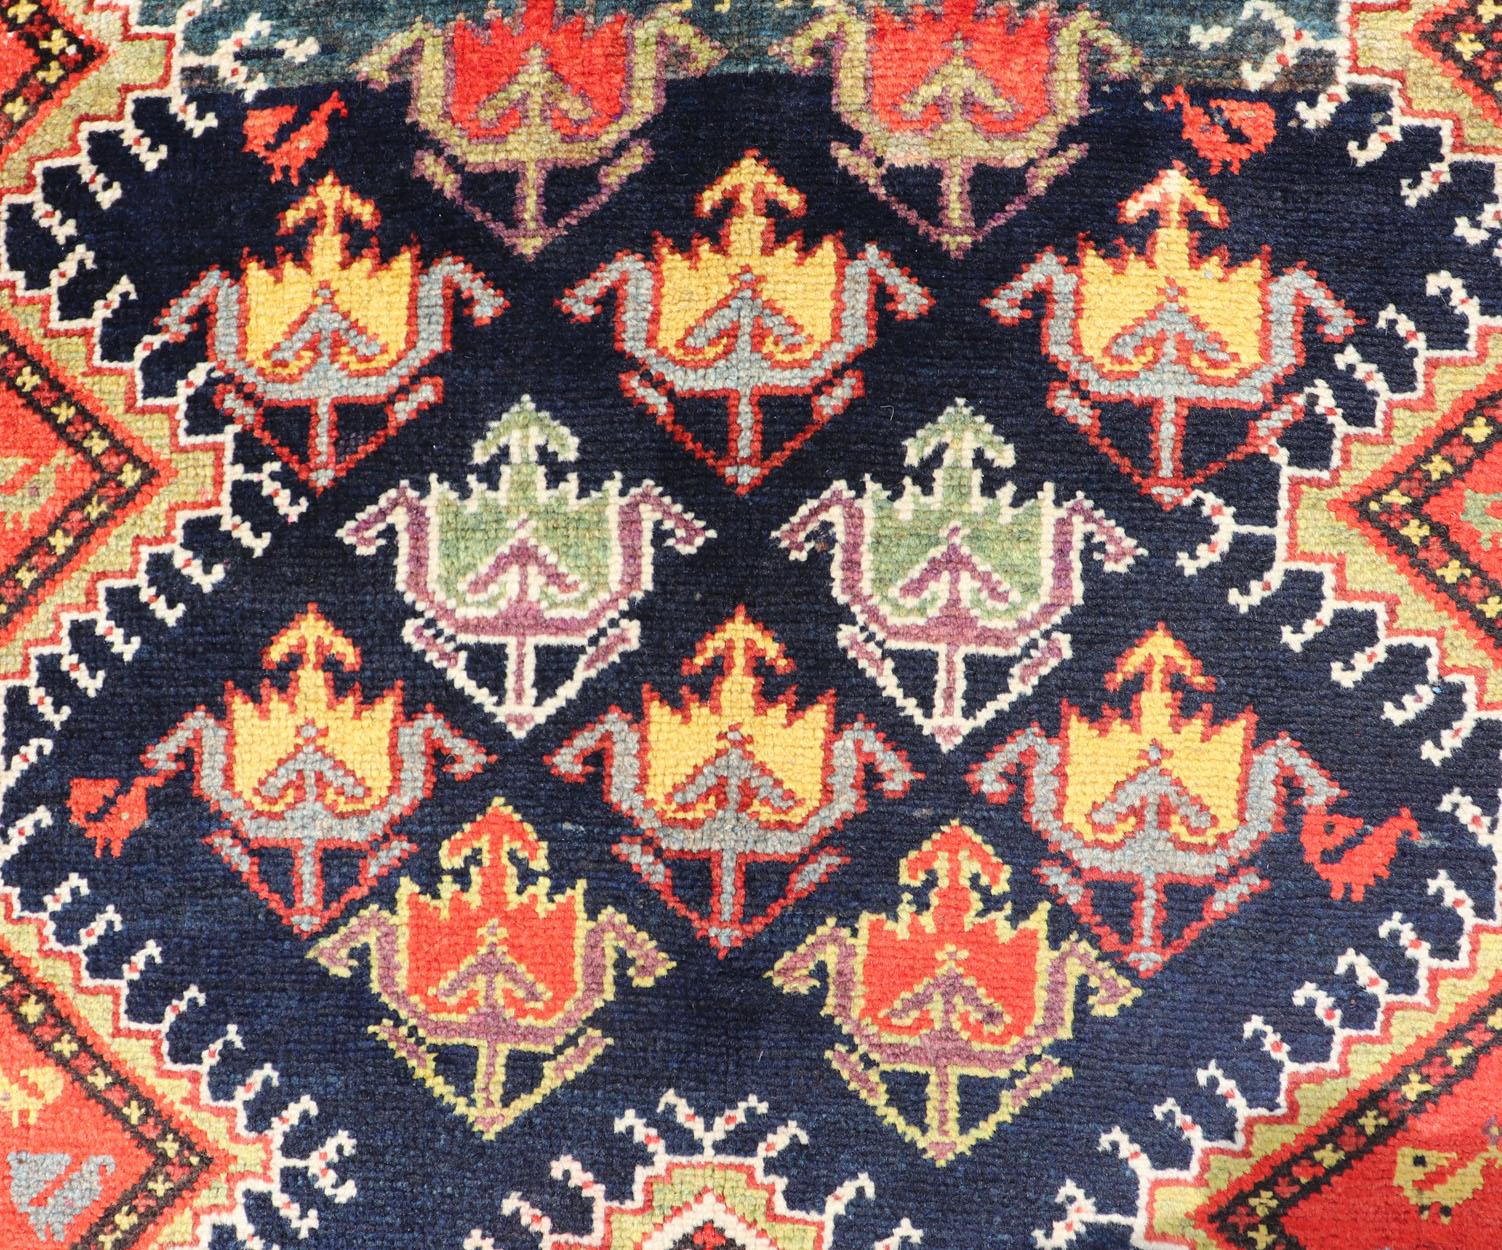 Wool Antique Persian Qashqai Runner with Geometric Medallion Design in Vivid Colors  For Sale